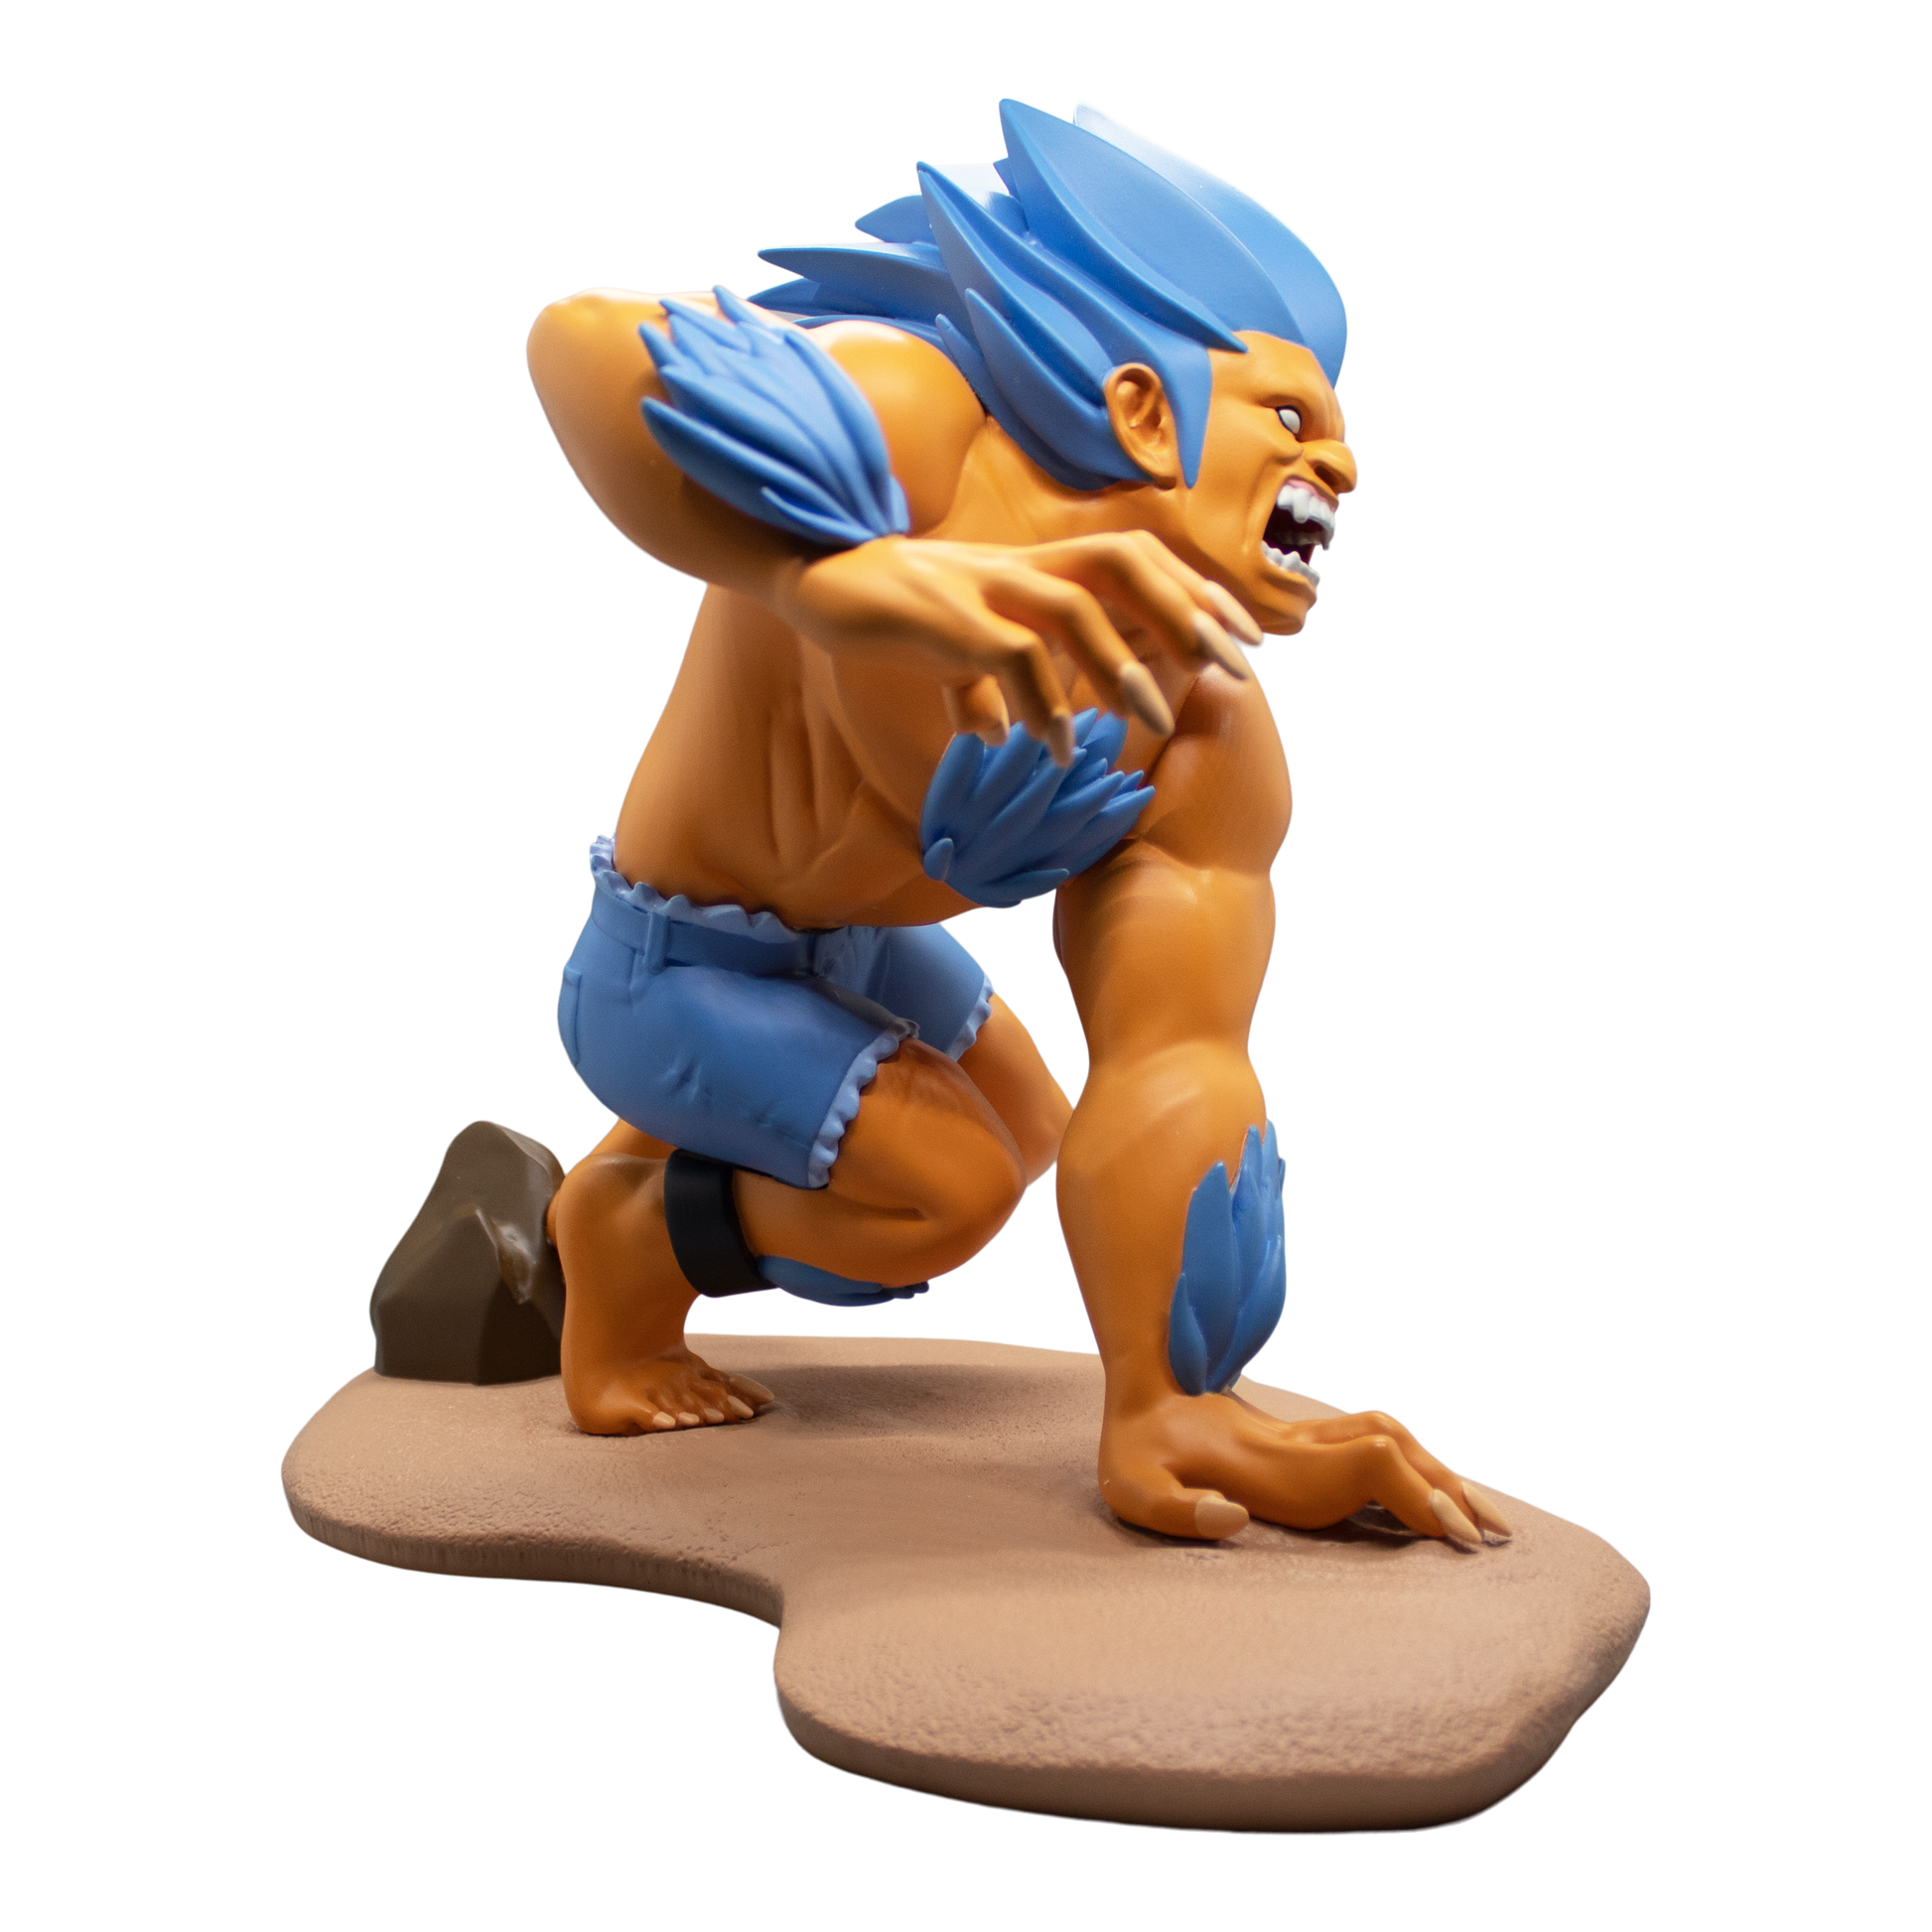 Street Fighter Blanka Player 2 Unleashed Designer Polystone Statue - Available 1st Quarter 2022 - Icon Heroes 